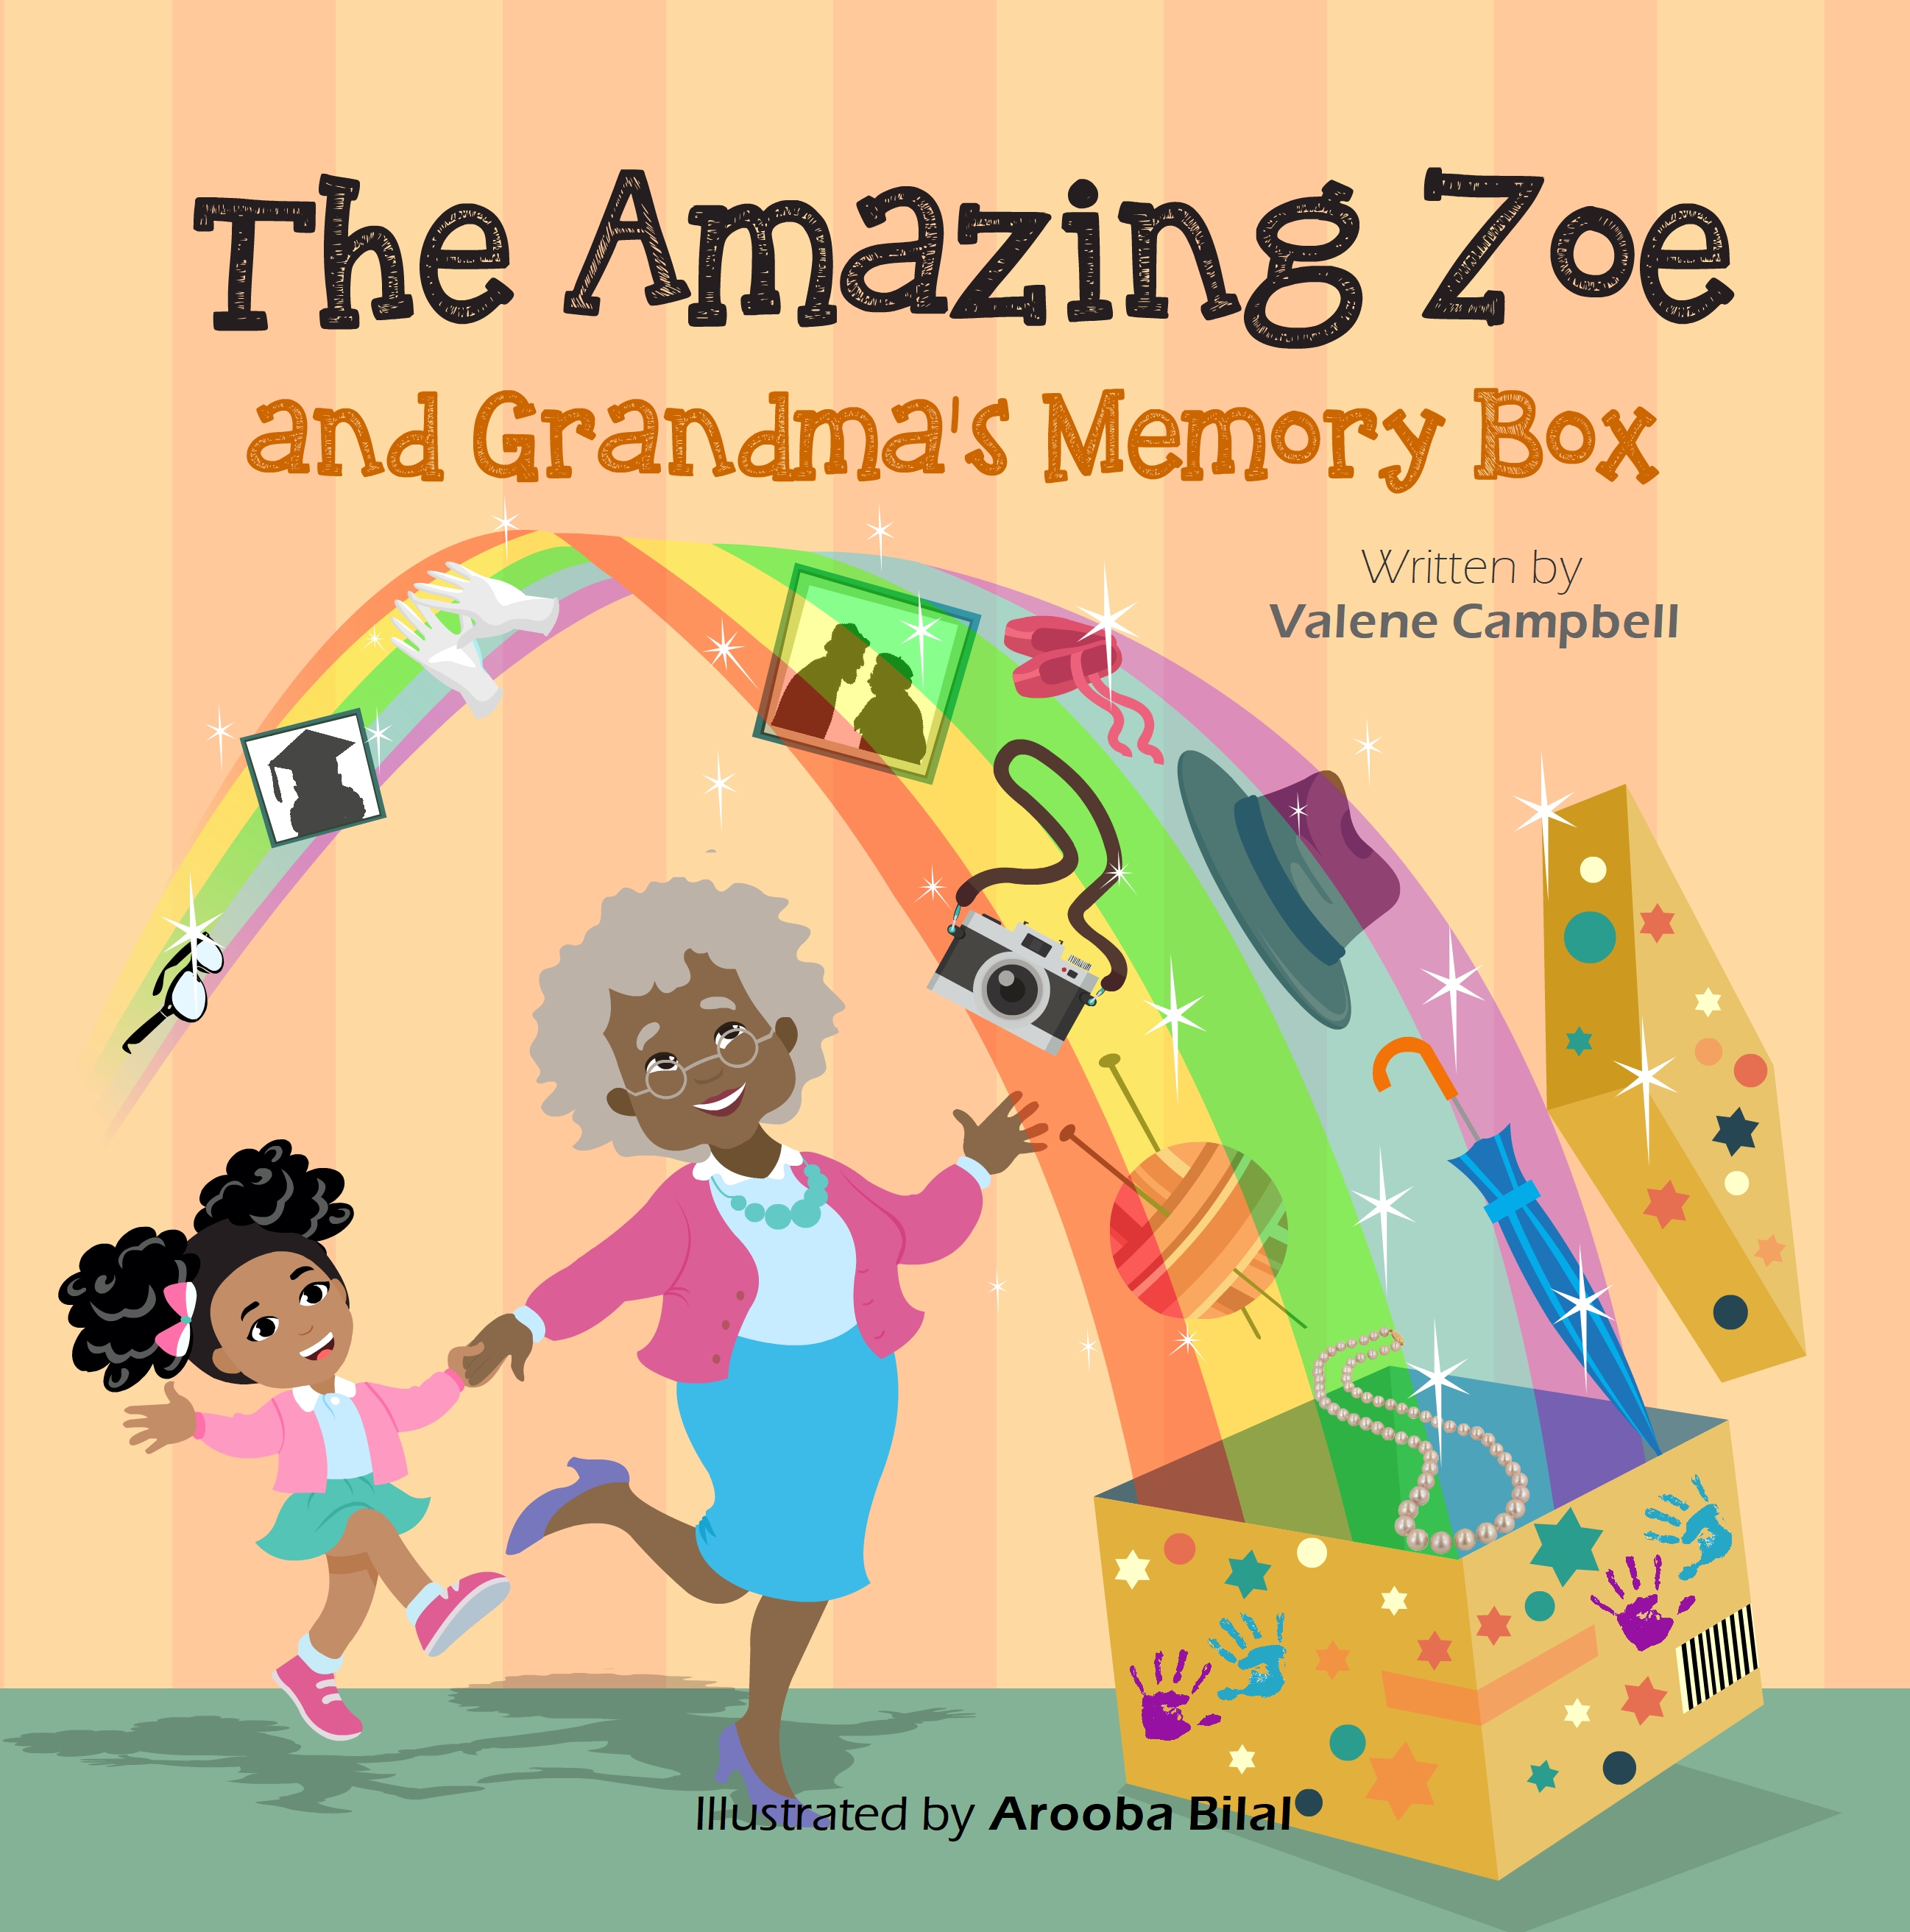 'The Amazing Zoe' Children's Book Series Releases NEW Book about Alzheimer's Disease